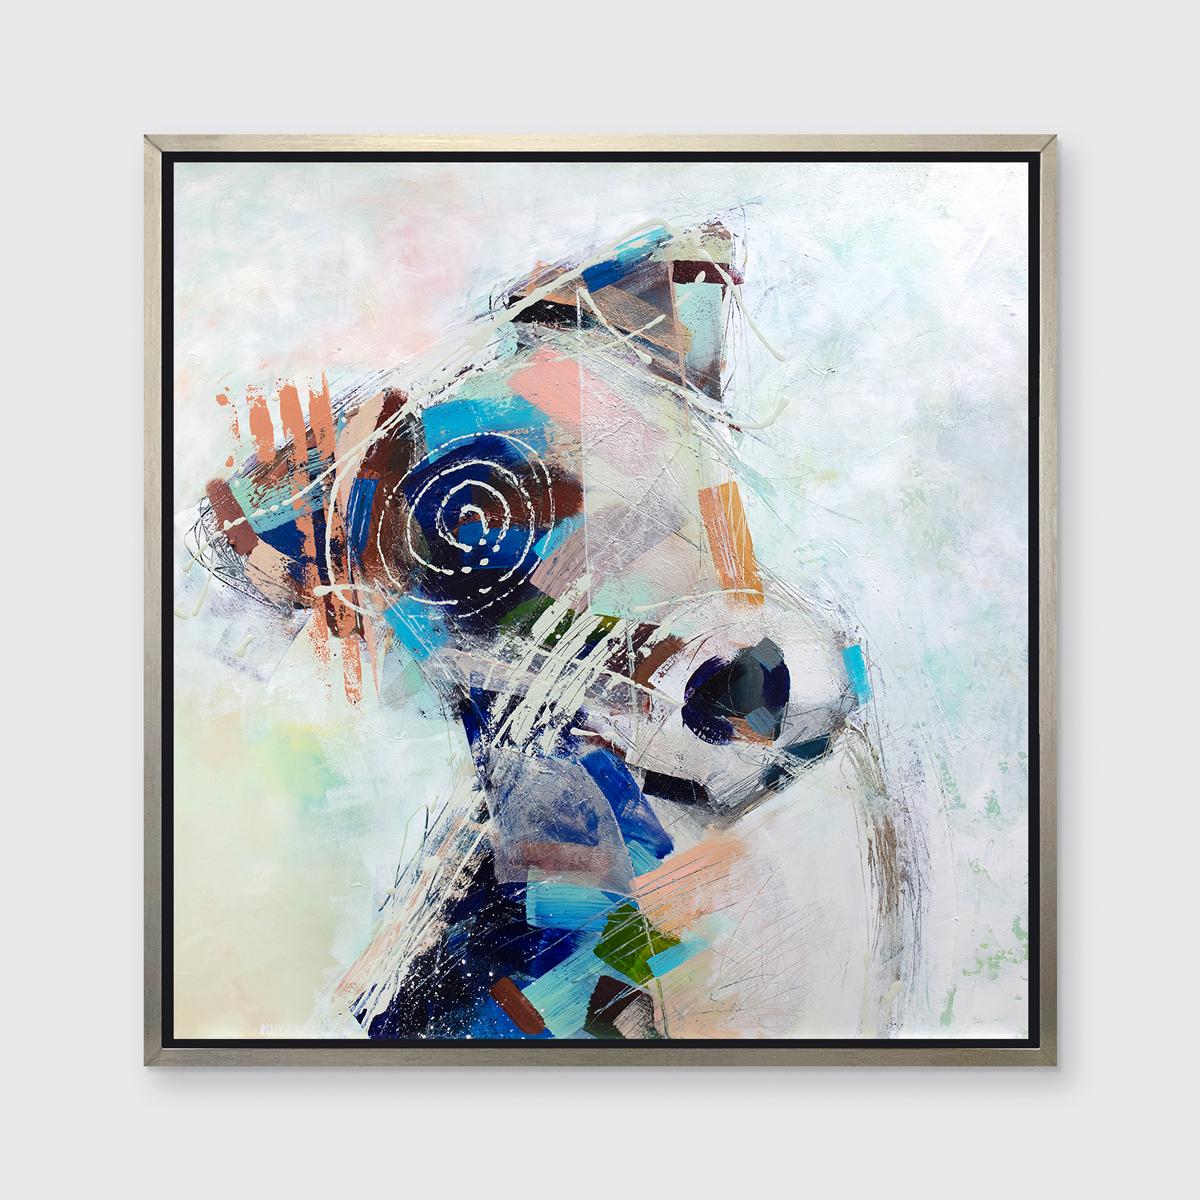 Russell Miyaki Abstract Print - "Course Dog" Limited Edition Giclee Print, 30" x 30"